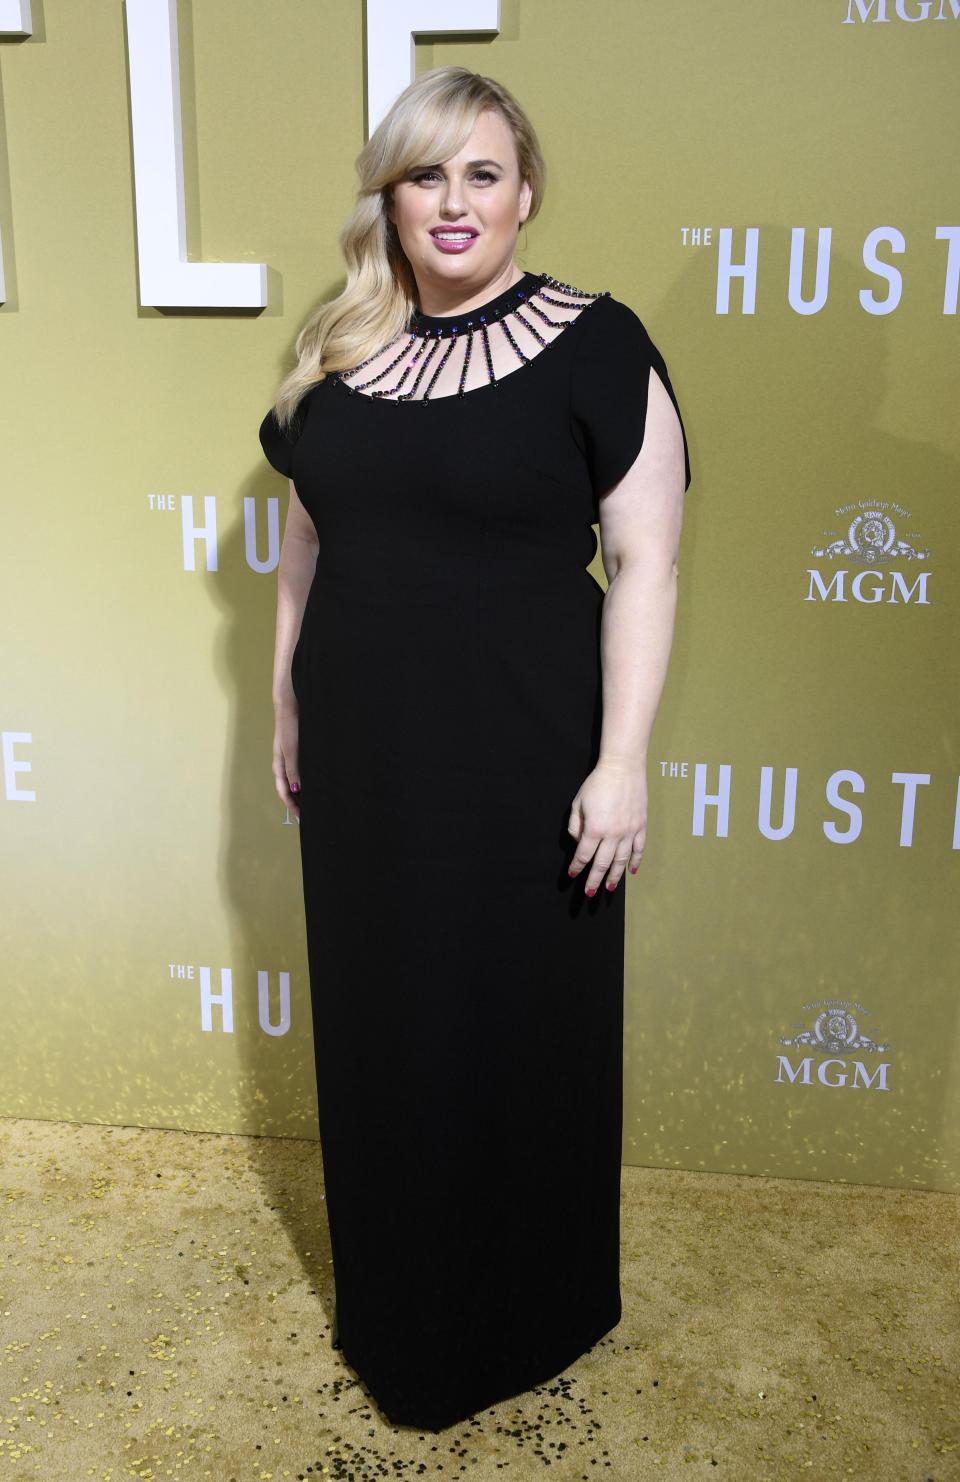 Rebel Wilson at the premiere of "The Hustle" in Hollywood on May 8.